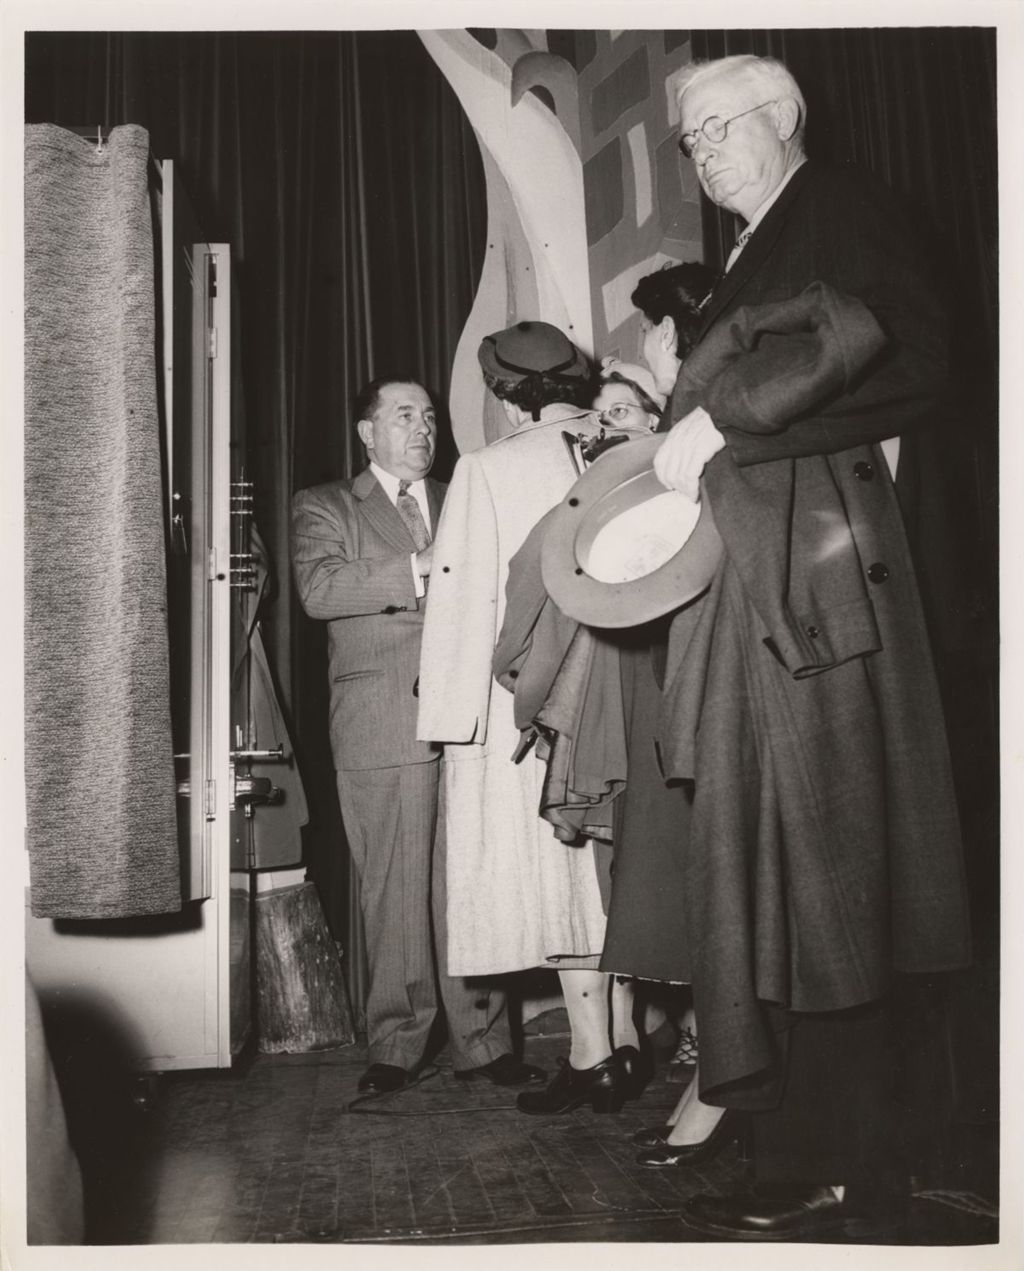 Miniature of Richard J. Daley at a voting machine event